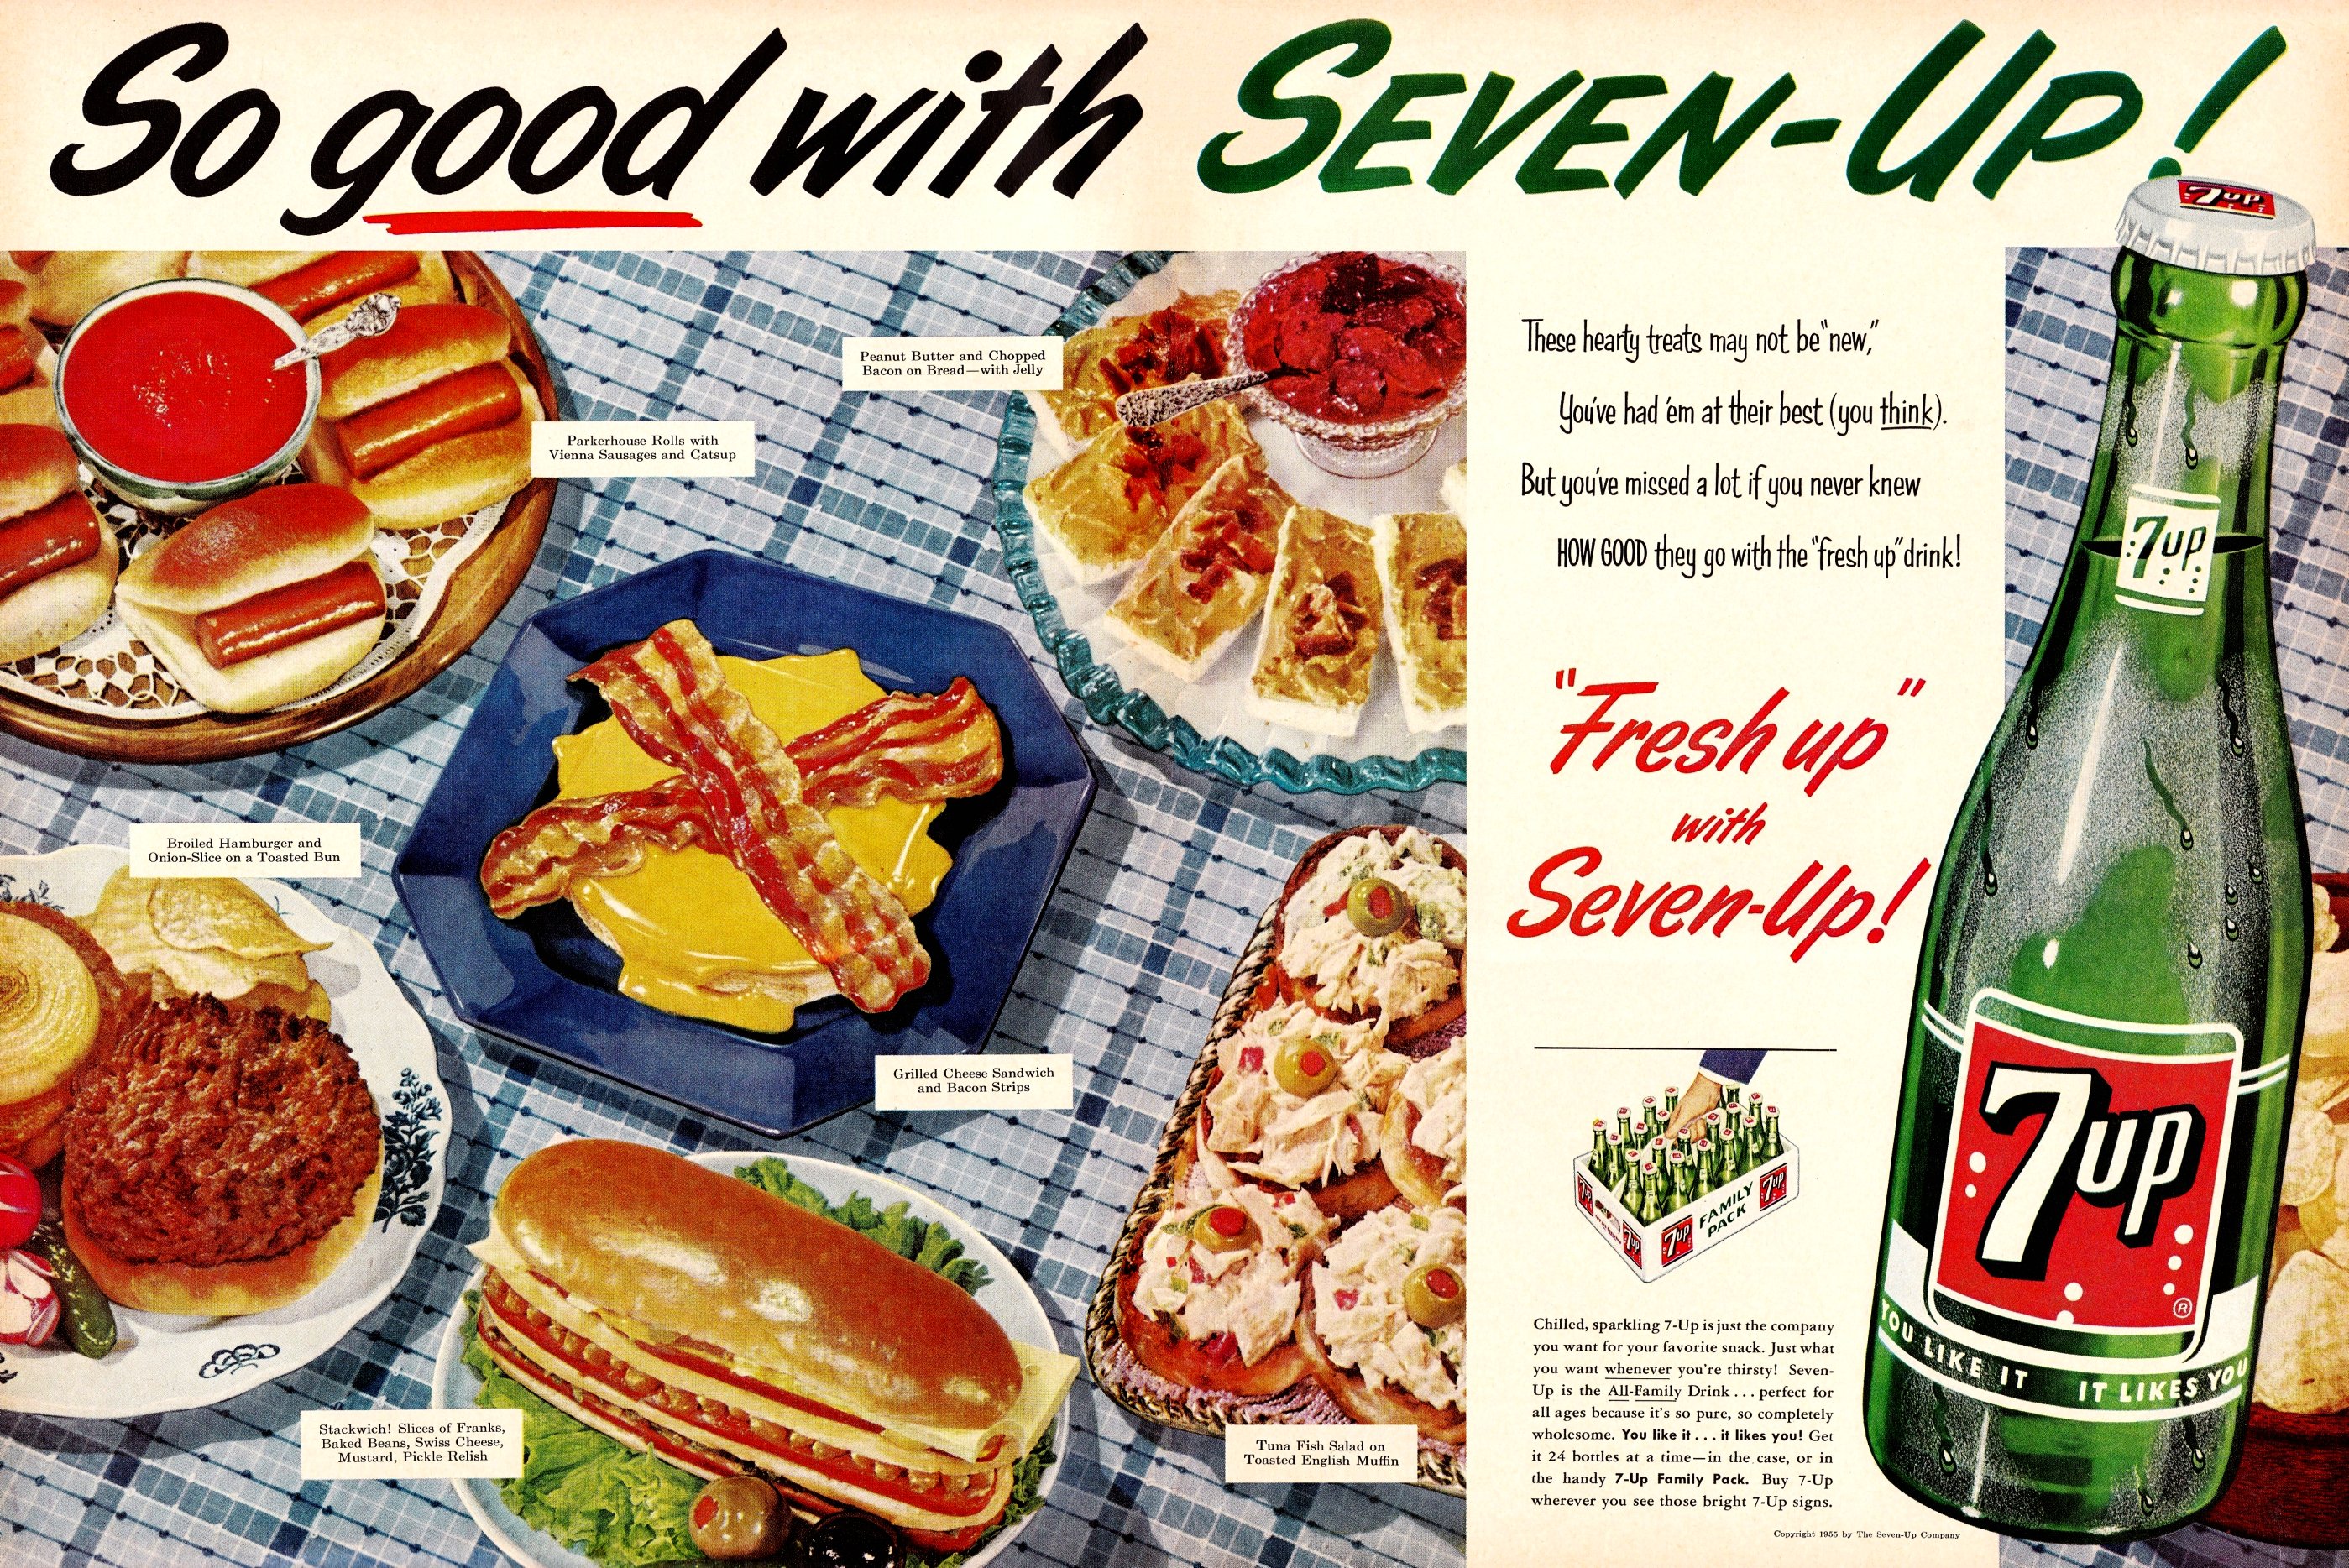 The Seven-Up Company - published in Life - February 7, 1955